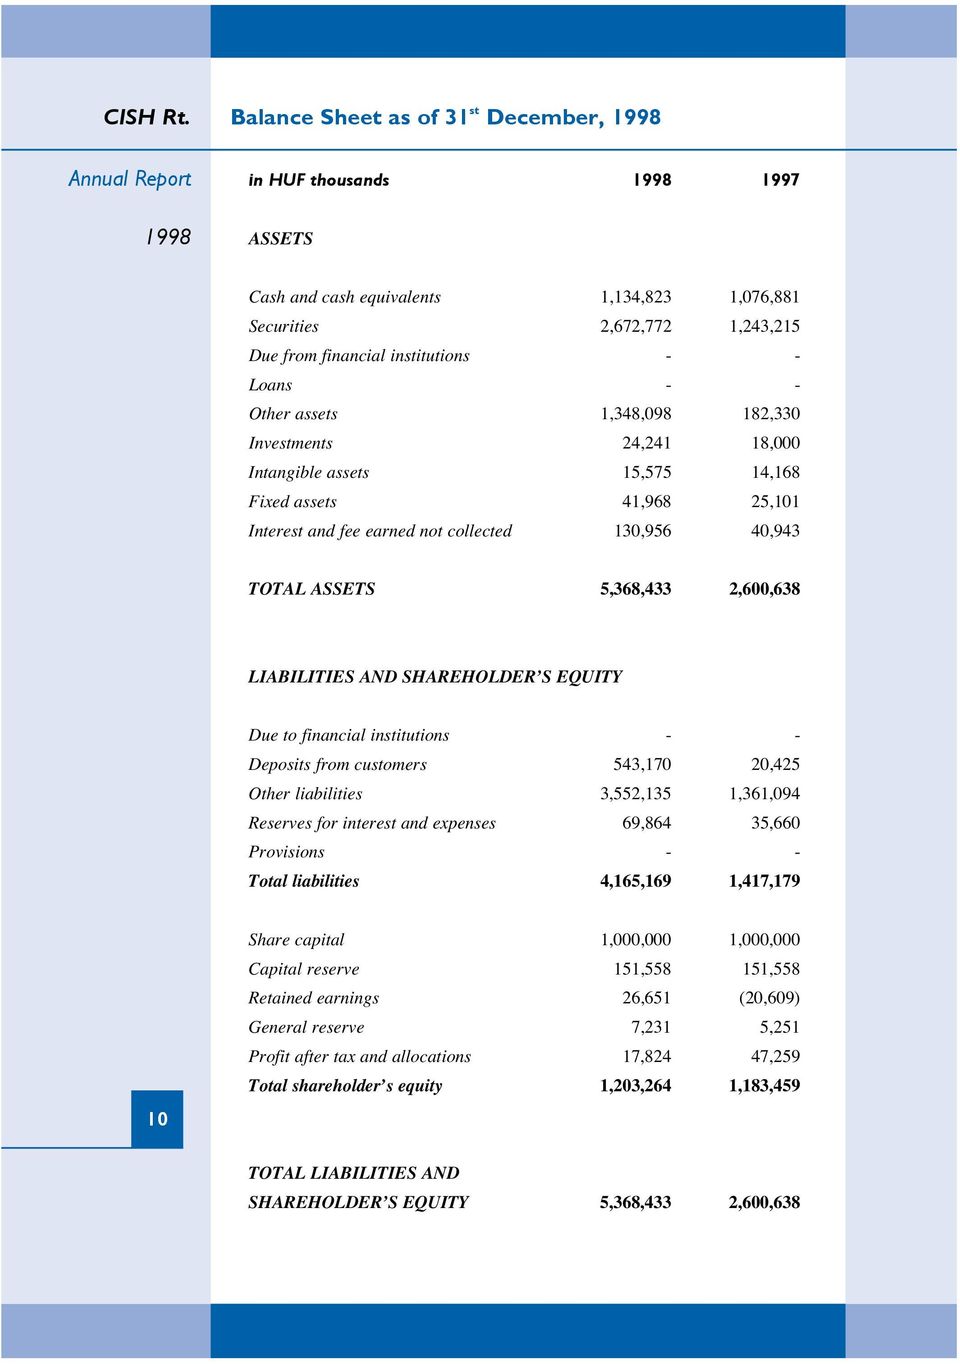 - Other assets 1,348,098 182,330 Investments 24,241 18,000 Intangible assets 15,575 14,168 Fixed assets 41,968 25,101 Interest and fee earned not collected 130,956 40,943 TOTAL ASSETS 5,368,433